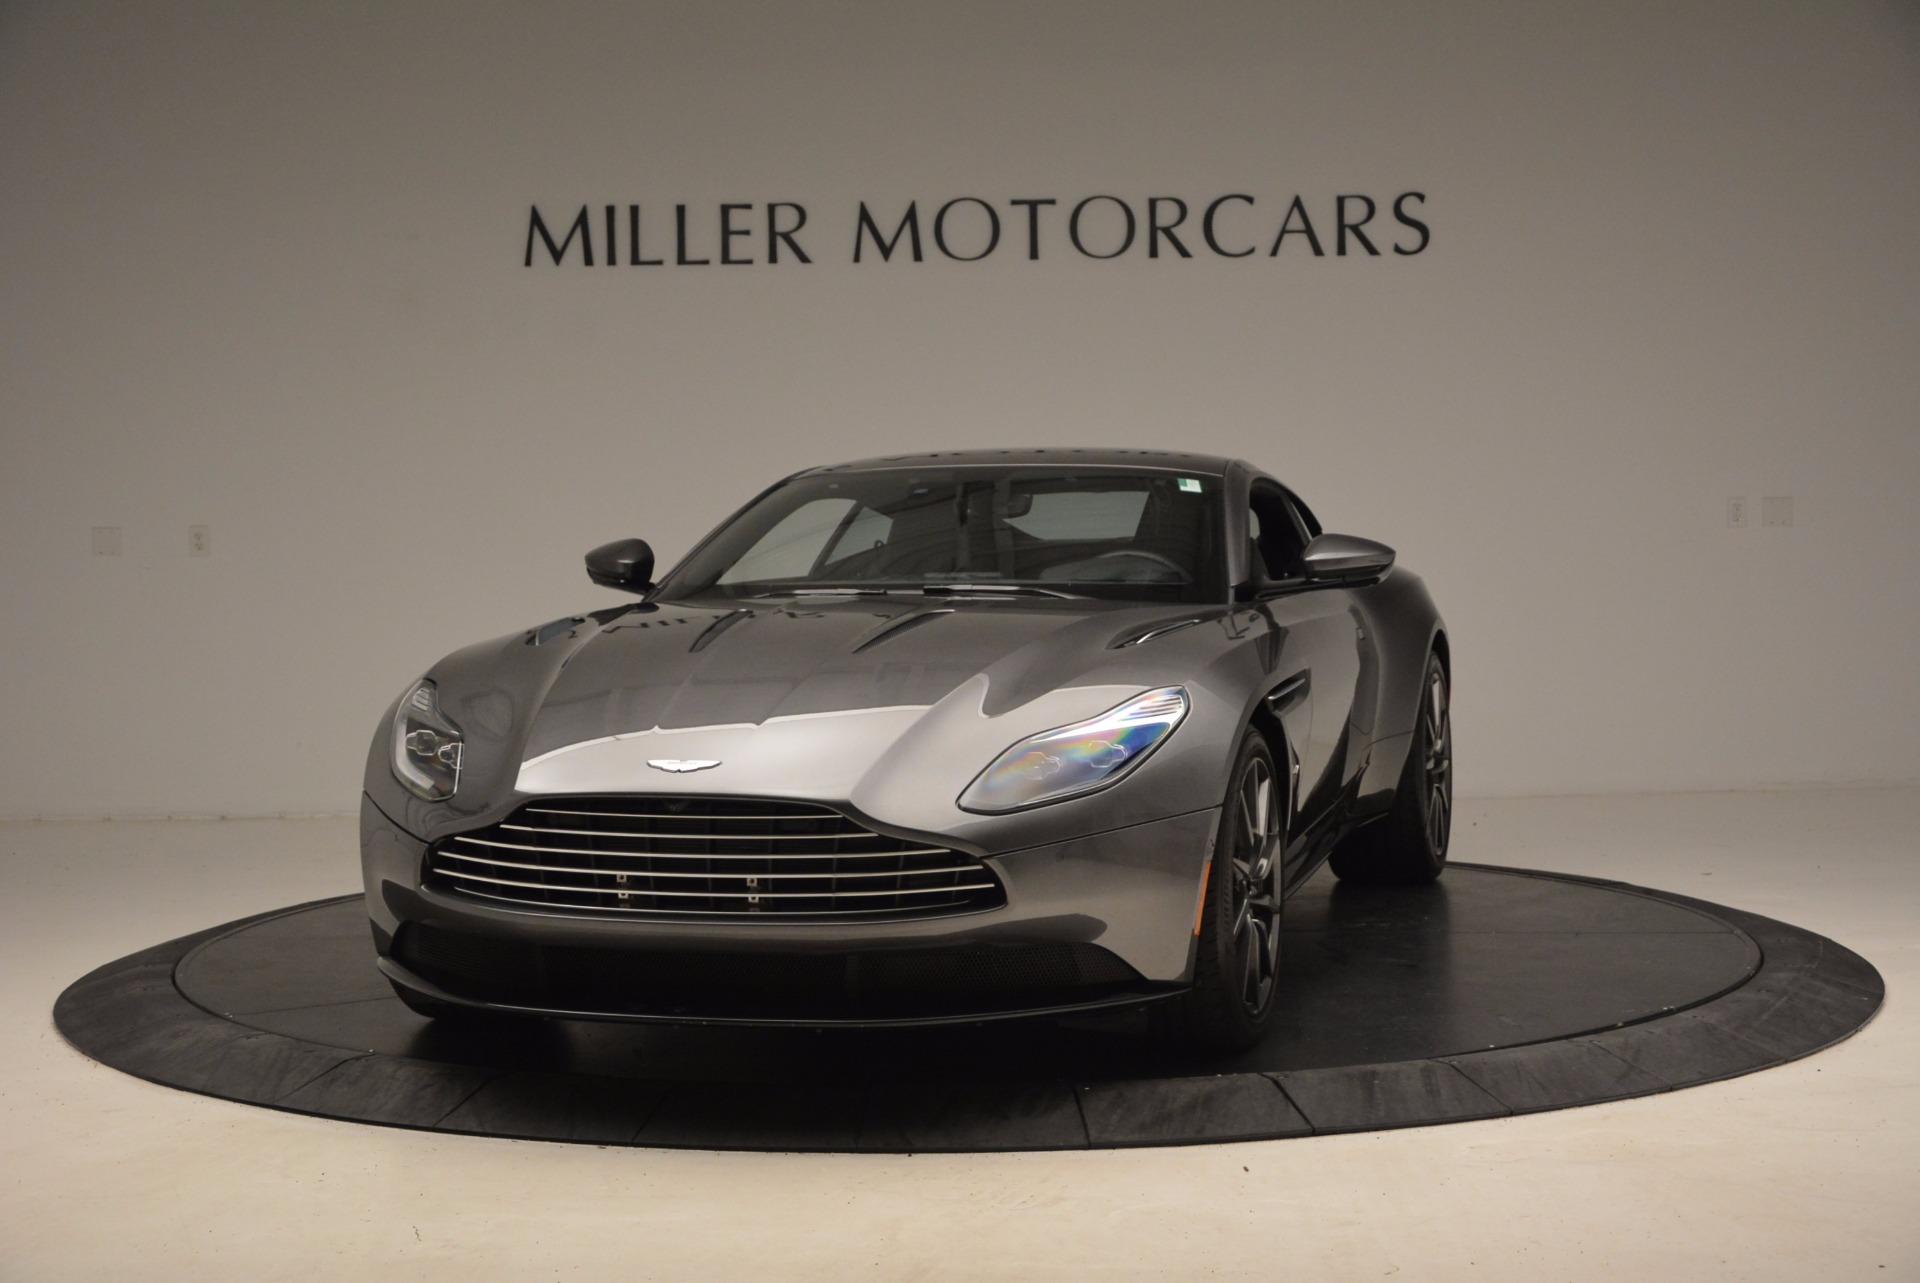 Used 2017 Aston Martin DB11 for sale Sold at Aston Martin of Greenwich in Greenwich CT 06830 1